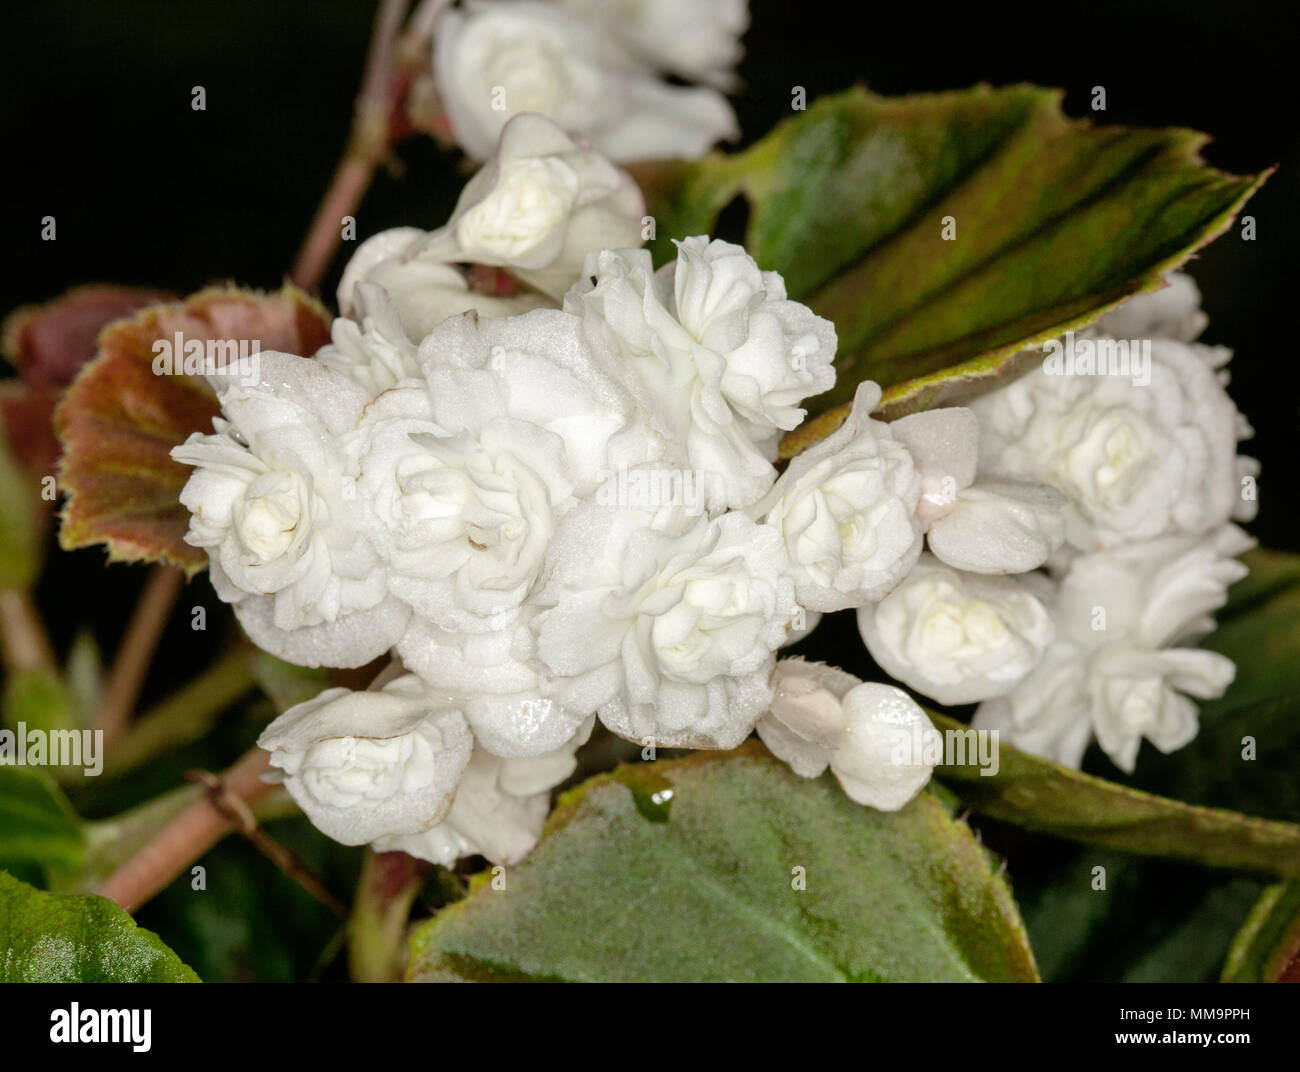 Cluster of double white flowers and red and green leaves of Begonia semperflorens 'Doublet' , bedding begonia, against dark background Stock Photo